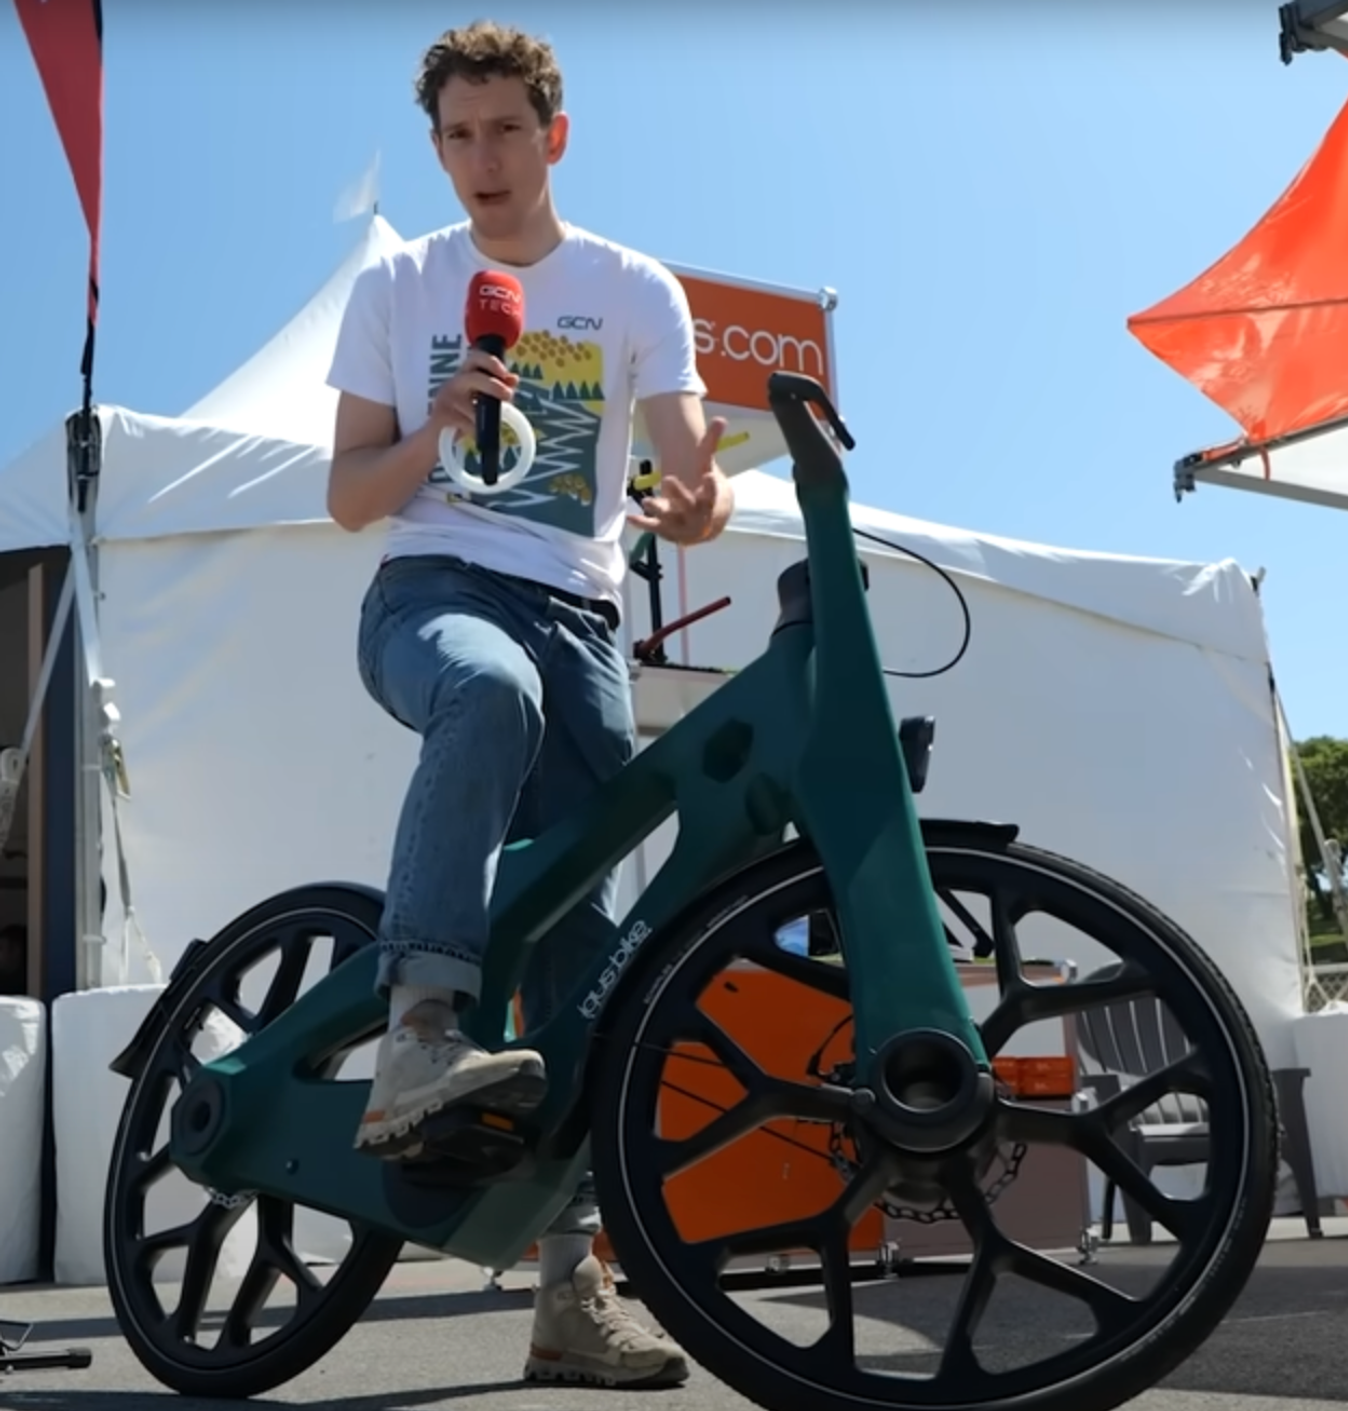 This Igus bikes is made out of 92% recycled plastics and could be a robust addition to city rental fleets